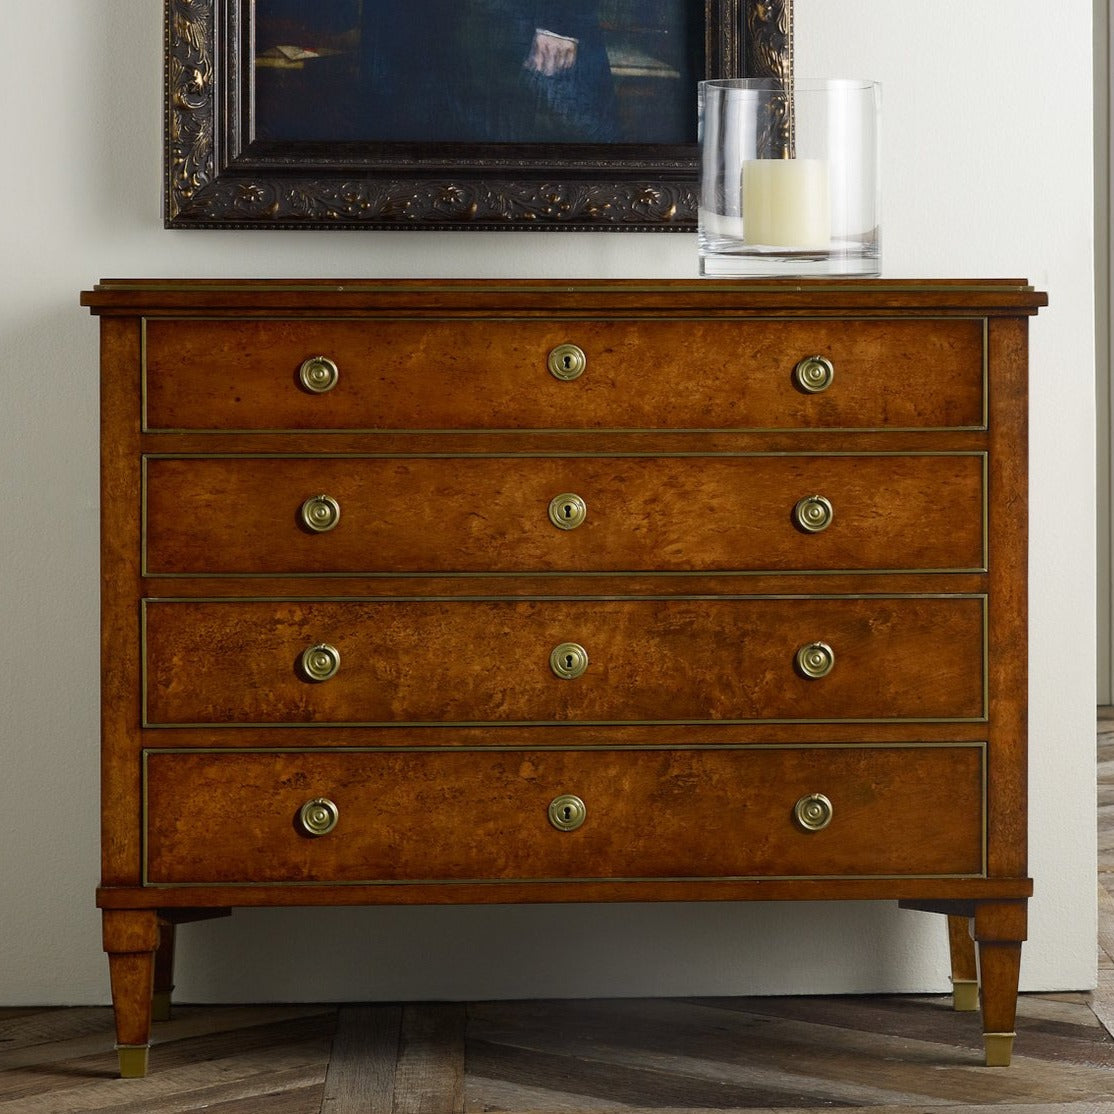 Modern History, 19th Century Classical Chest